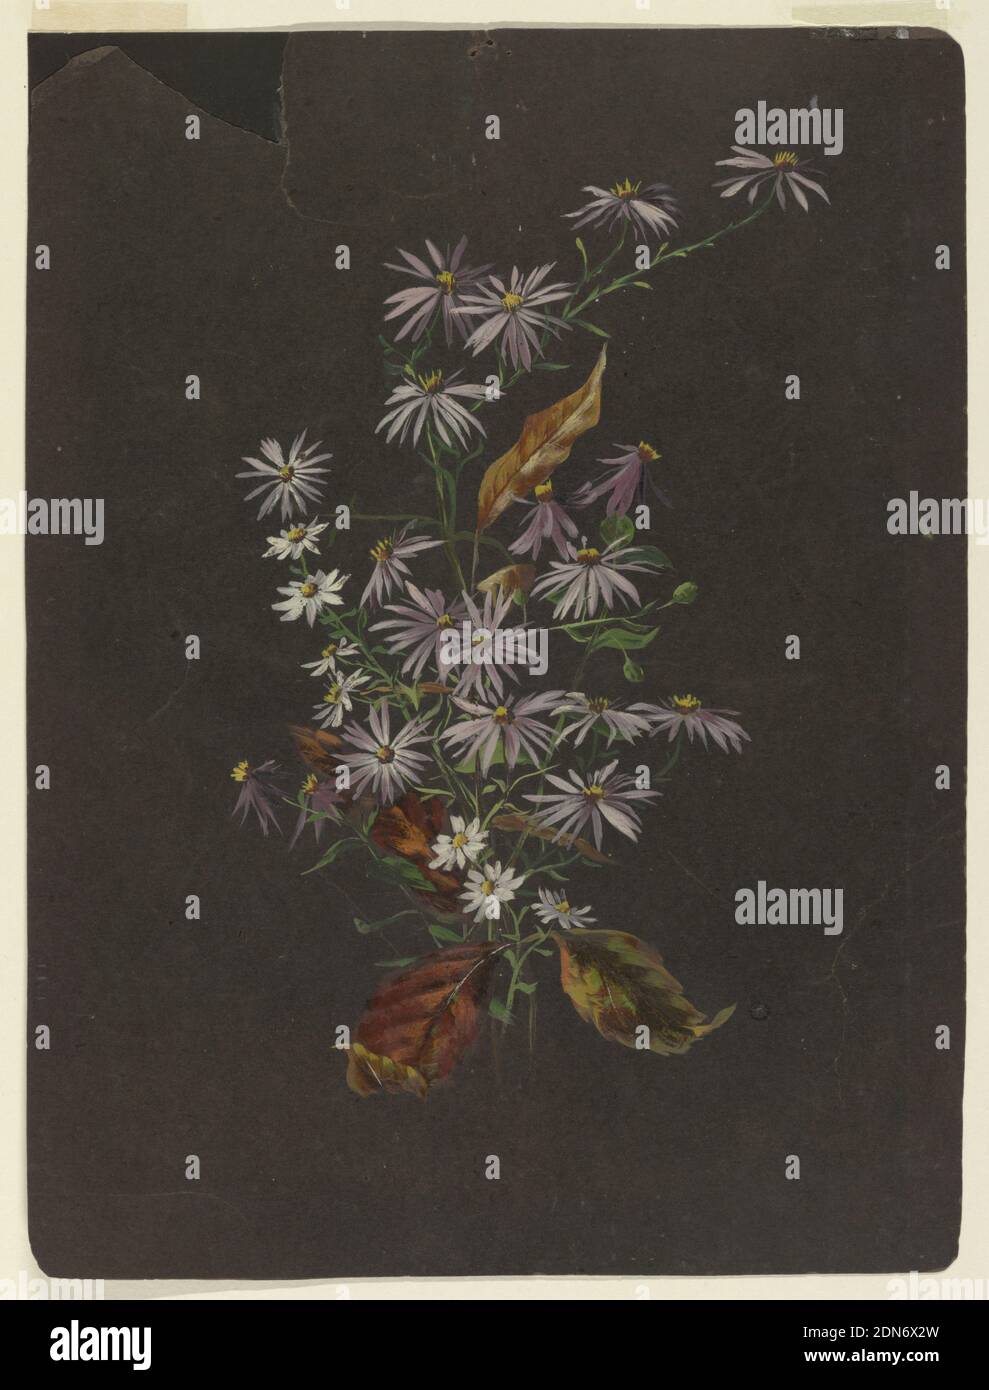 Study of an Autumn Bouquet, Sophia L. Crownfield, (American, 1862–1929), Brush and oil on black paper, A painting depicting an autumn bouquet of daisies, asters and autumn leaves on black paper., USA, ca. 1890, nature studies, Drawing Stock Photo